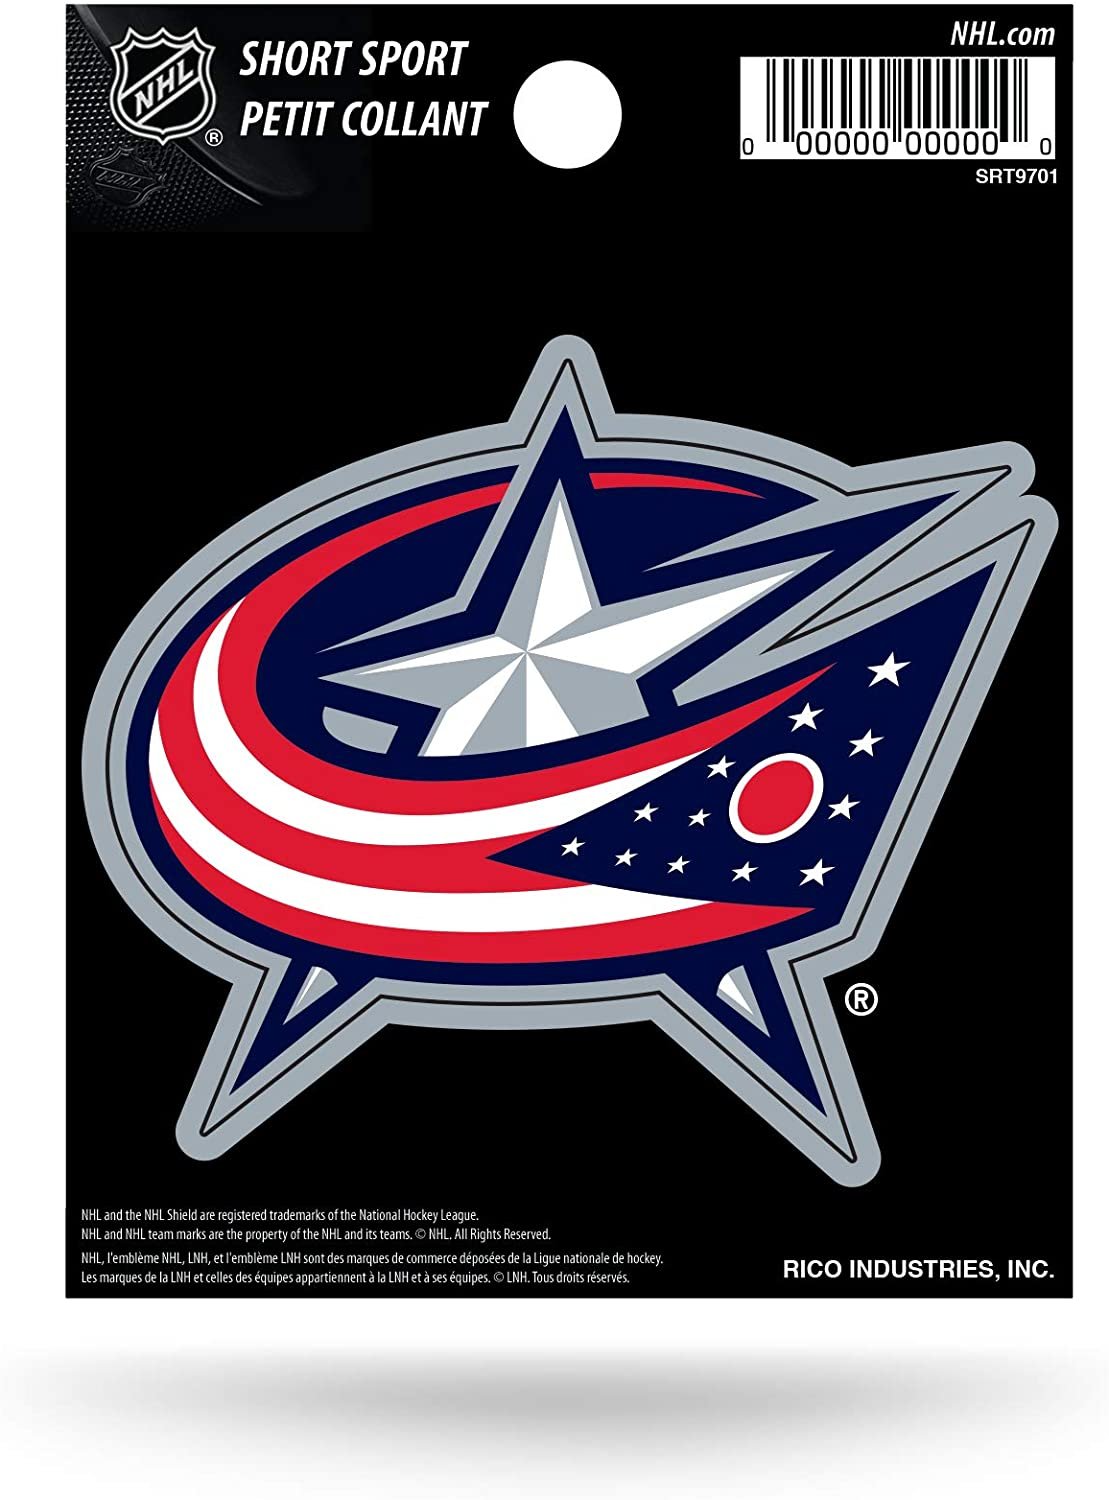 Columbus Blue Jackets 3 Inch Die Cut Decal Sticker Full Adhesive Backing